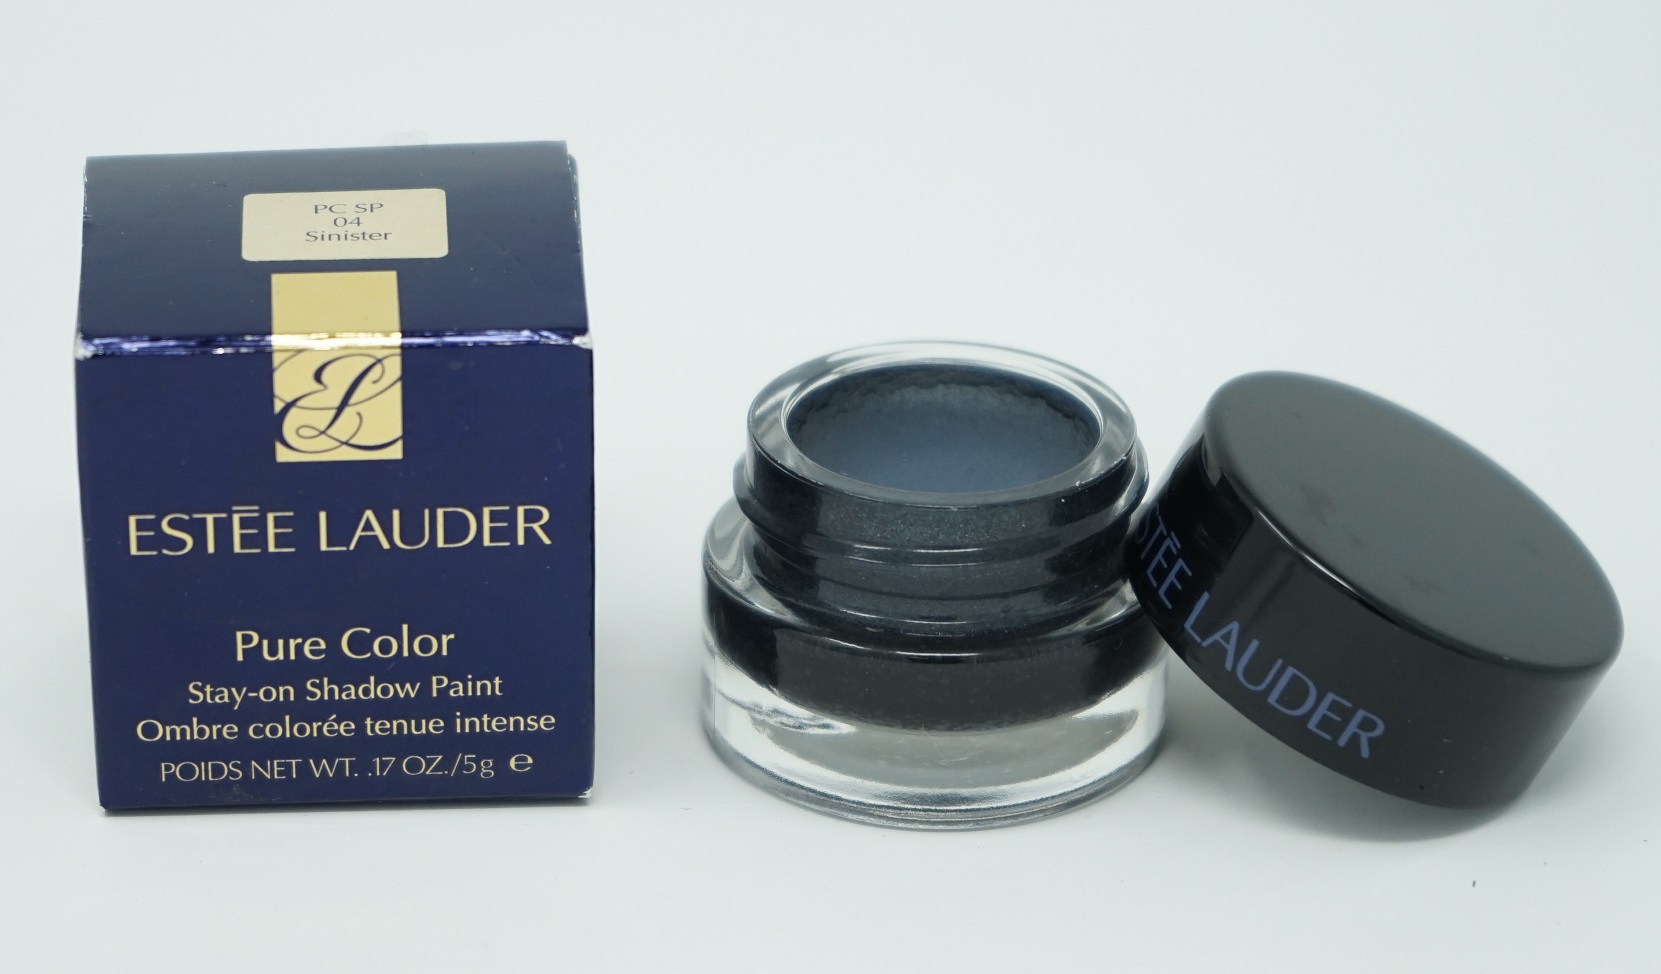 Estee Lauder Pure Color Stay-on Shadow Paint PC SP 04 Sinister